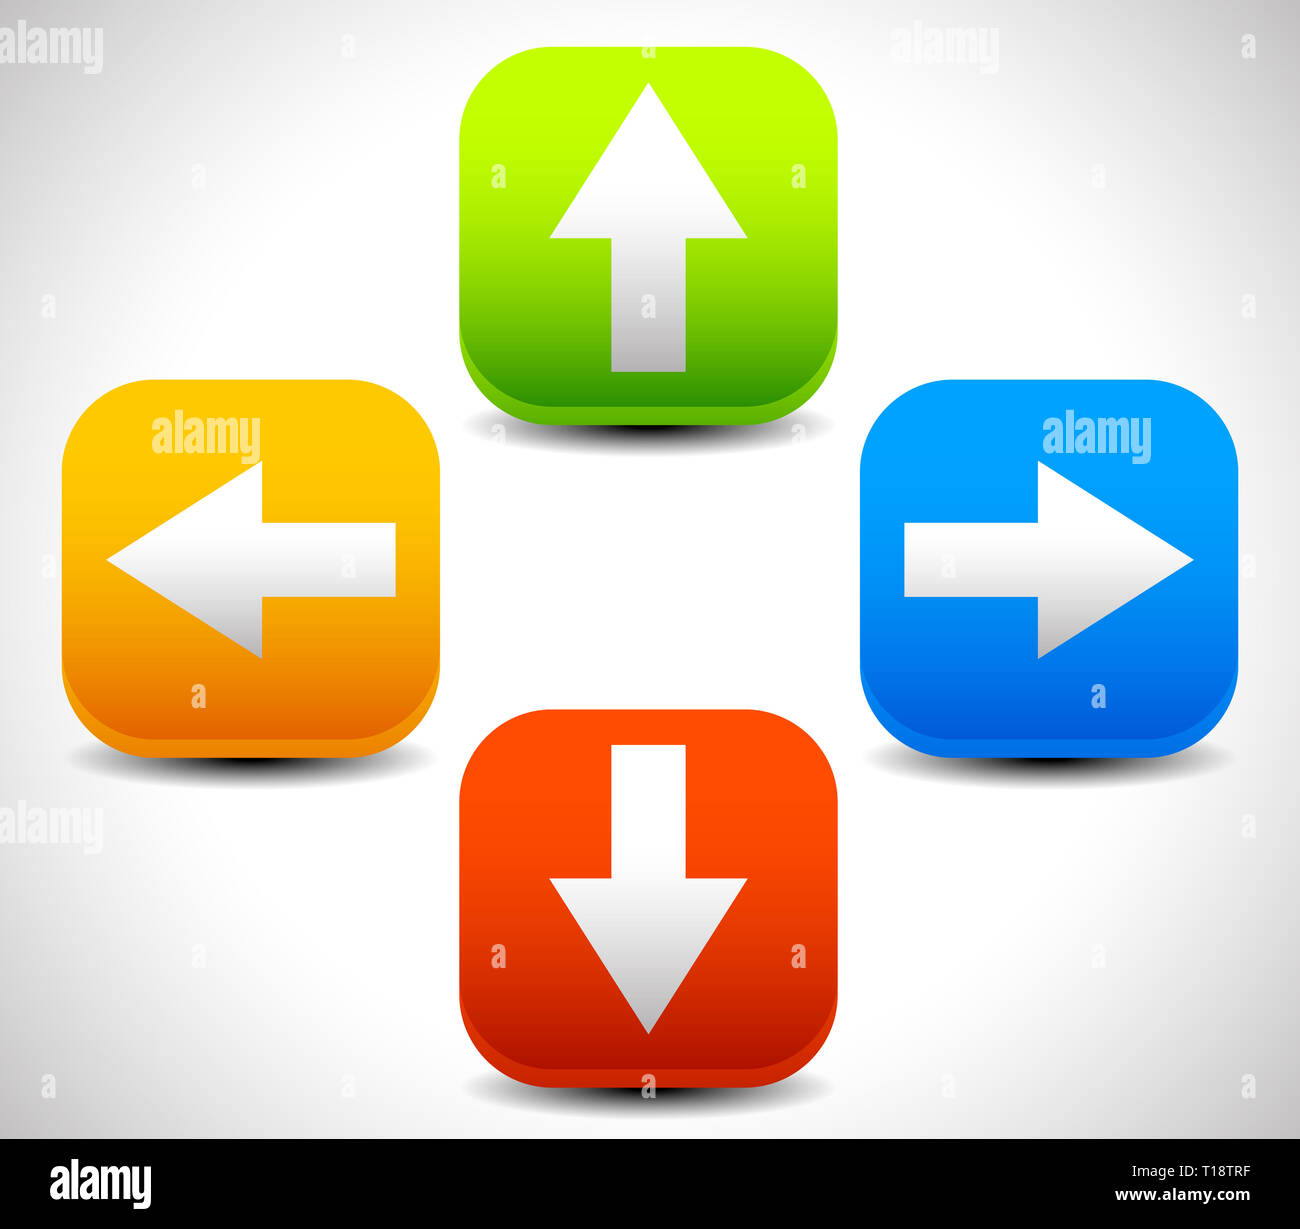 Arrow Icons Pointing Up Down Left And Right Vector Graphic Stock Photo Alamy